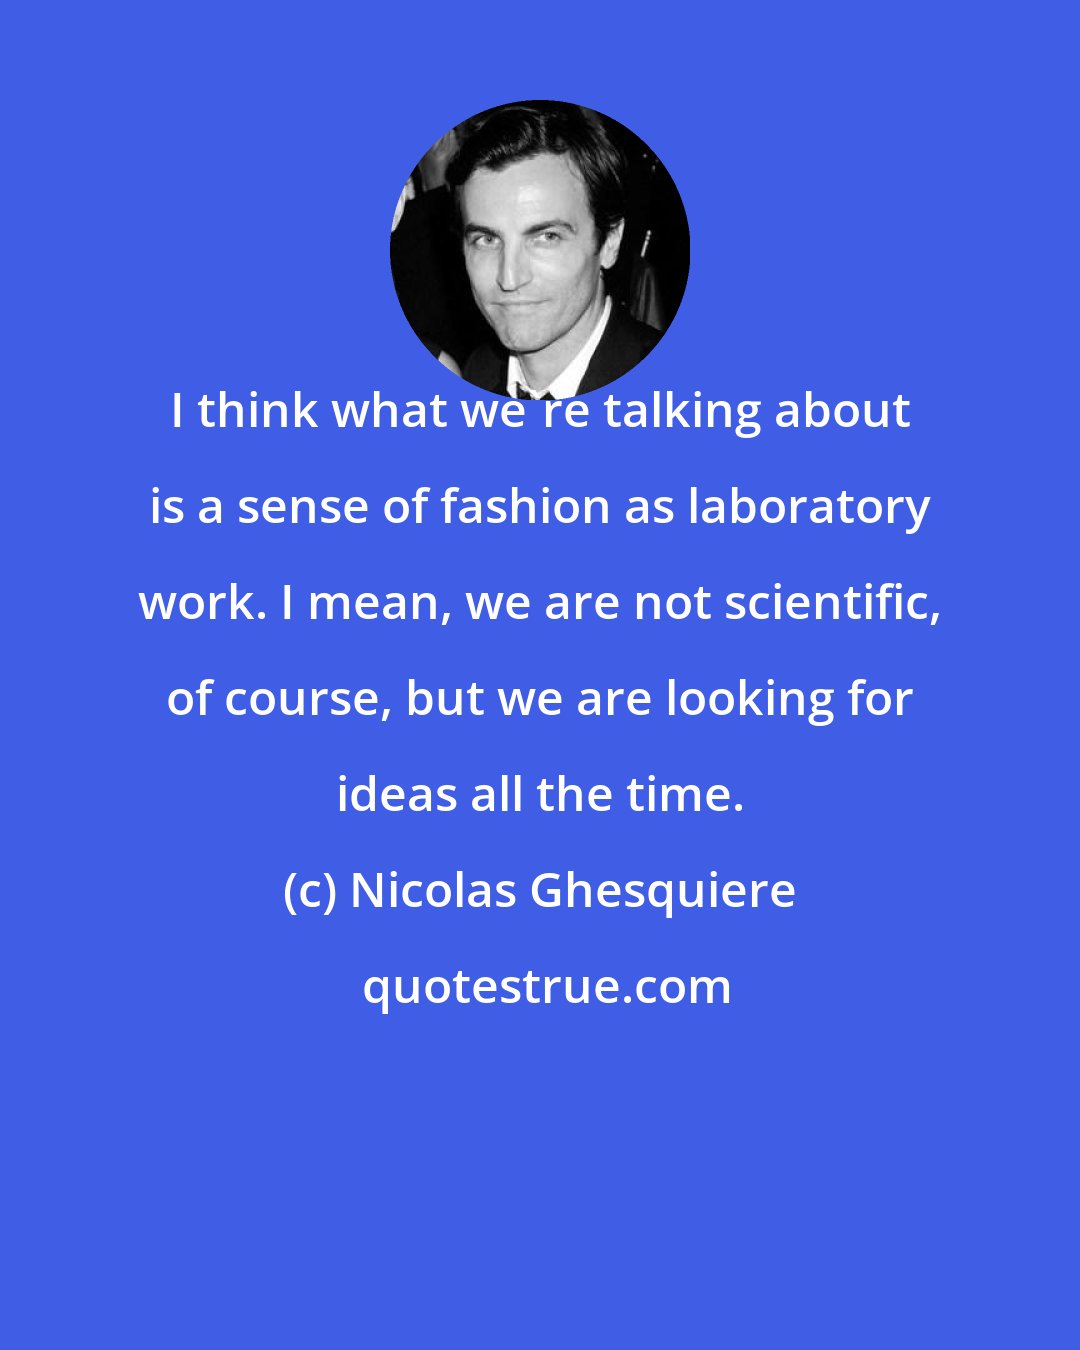 Nicolas Ghesquiere: I think what we're talking about is a sense of fashion as laboratory work. I mean, we are not scientific, of course, but we are looking for ideas all the time.